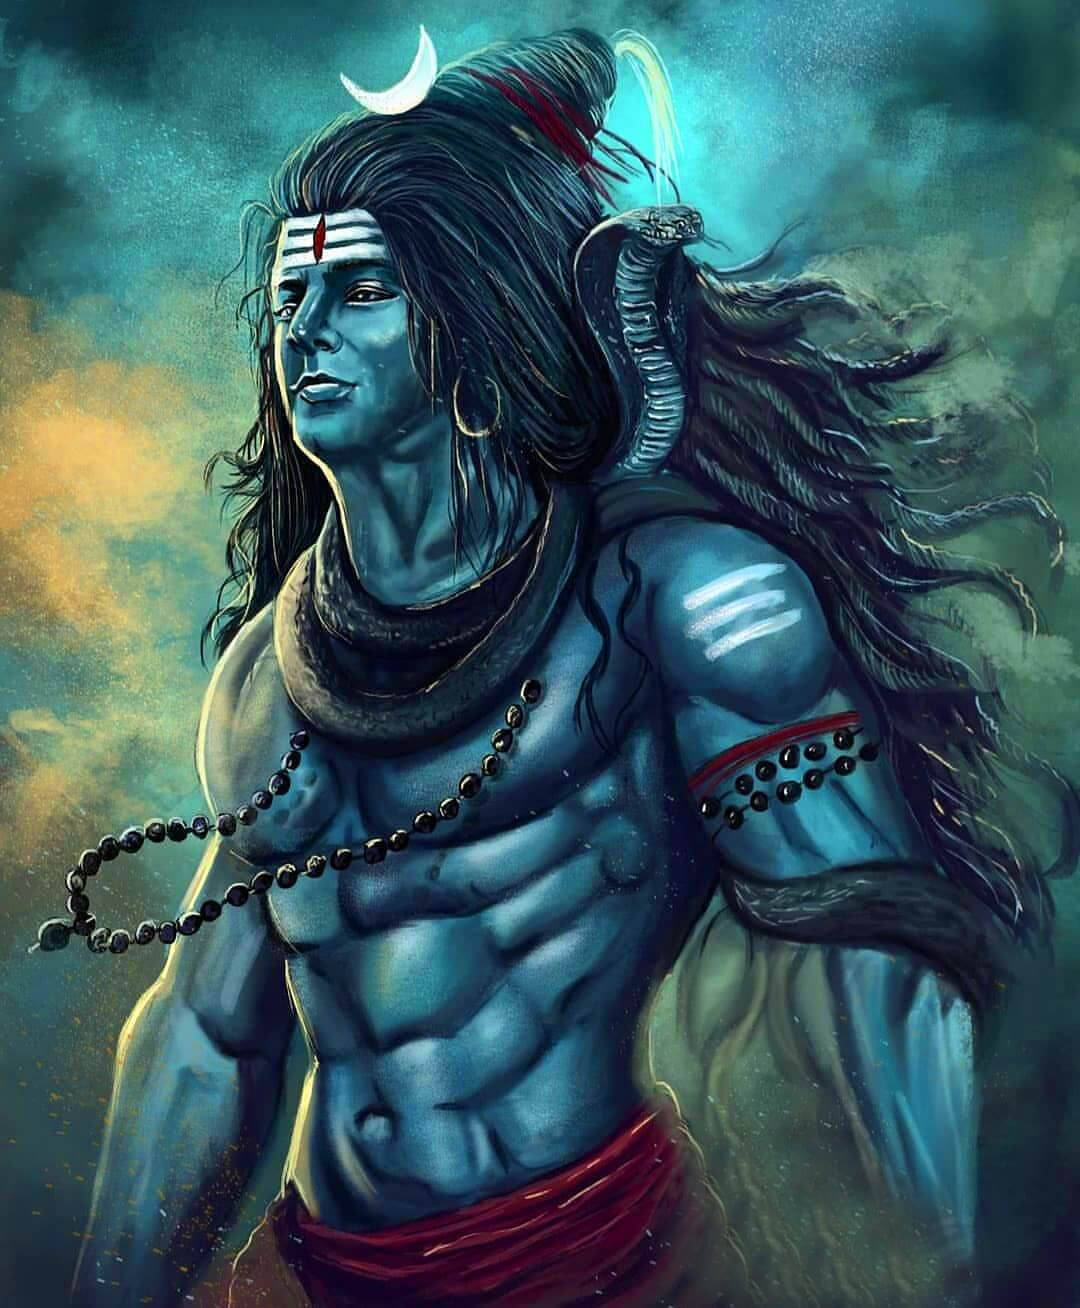 Incredible Compilation: Extensive Collection of 999+ High Definition Mahadev Images in Full 4K